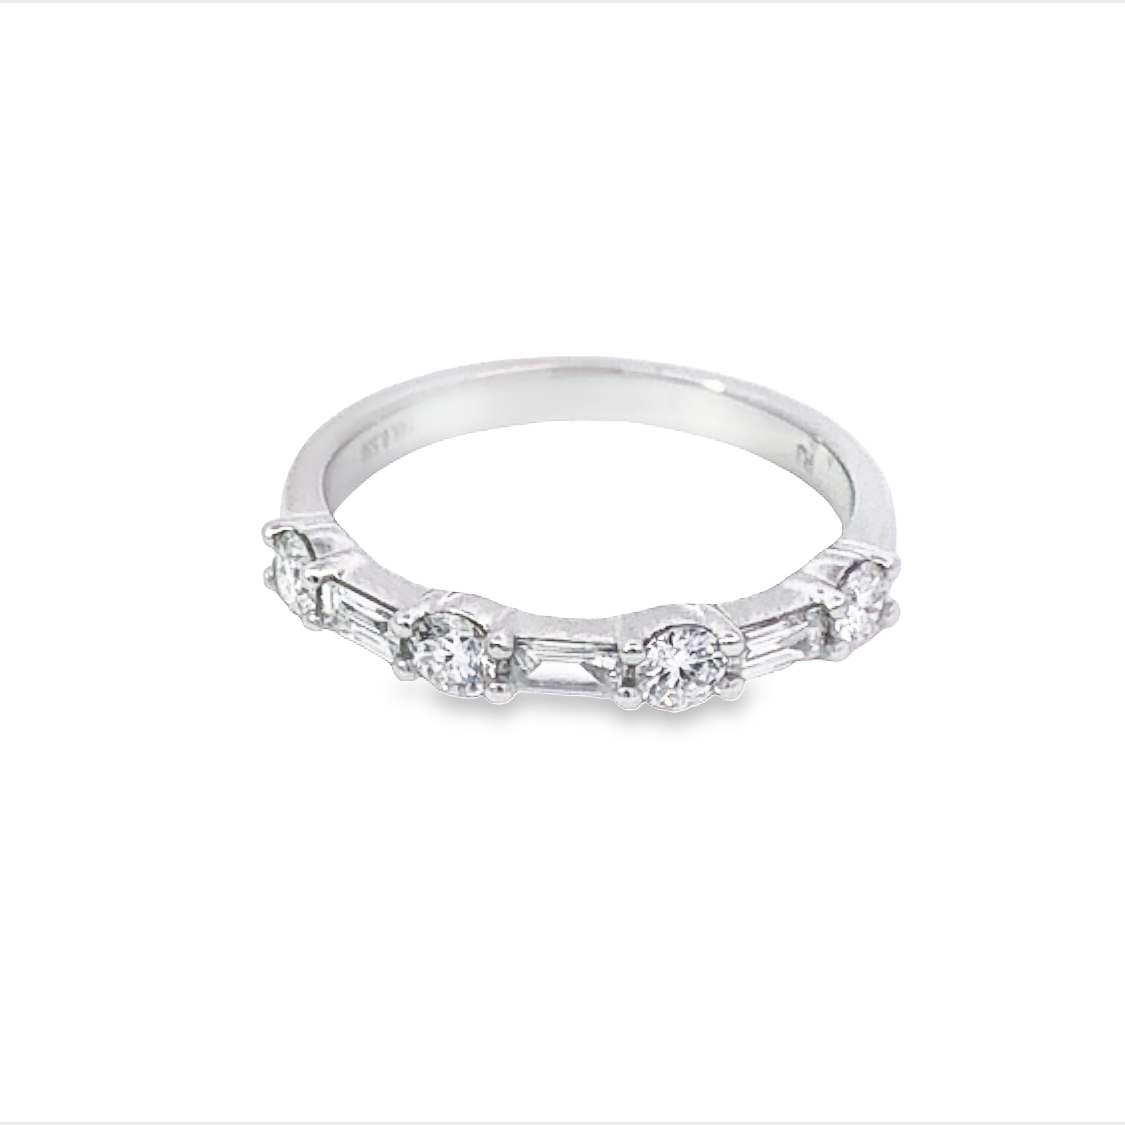 14K White Gold Anniversary Band with & 4 Round Diamonds .36 Tcw G-H SI  3 Baguette Diamonds .17 Tcw  Size 6